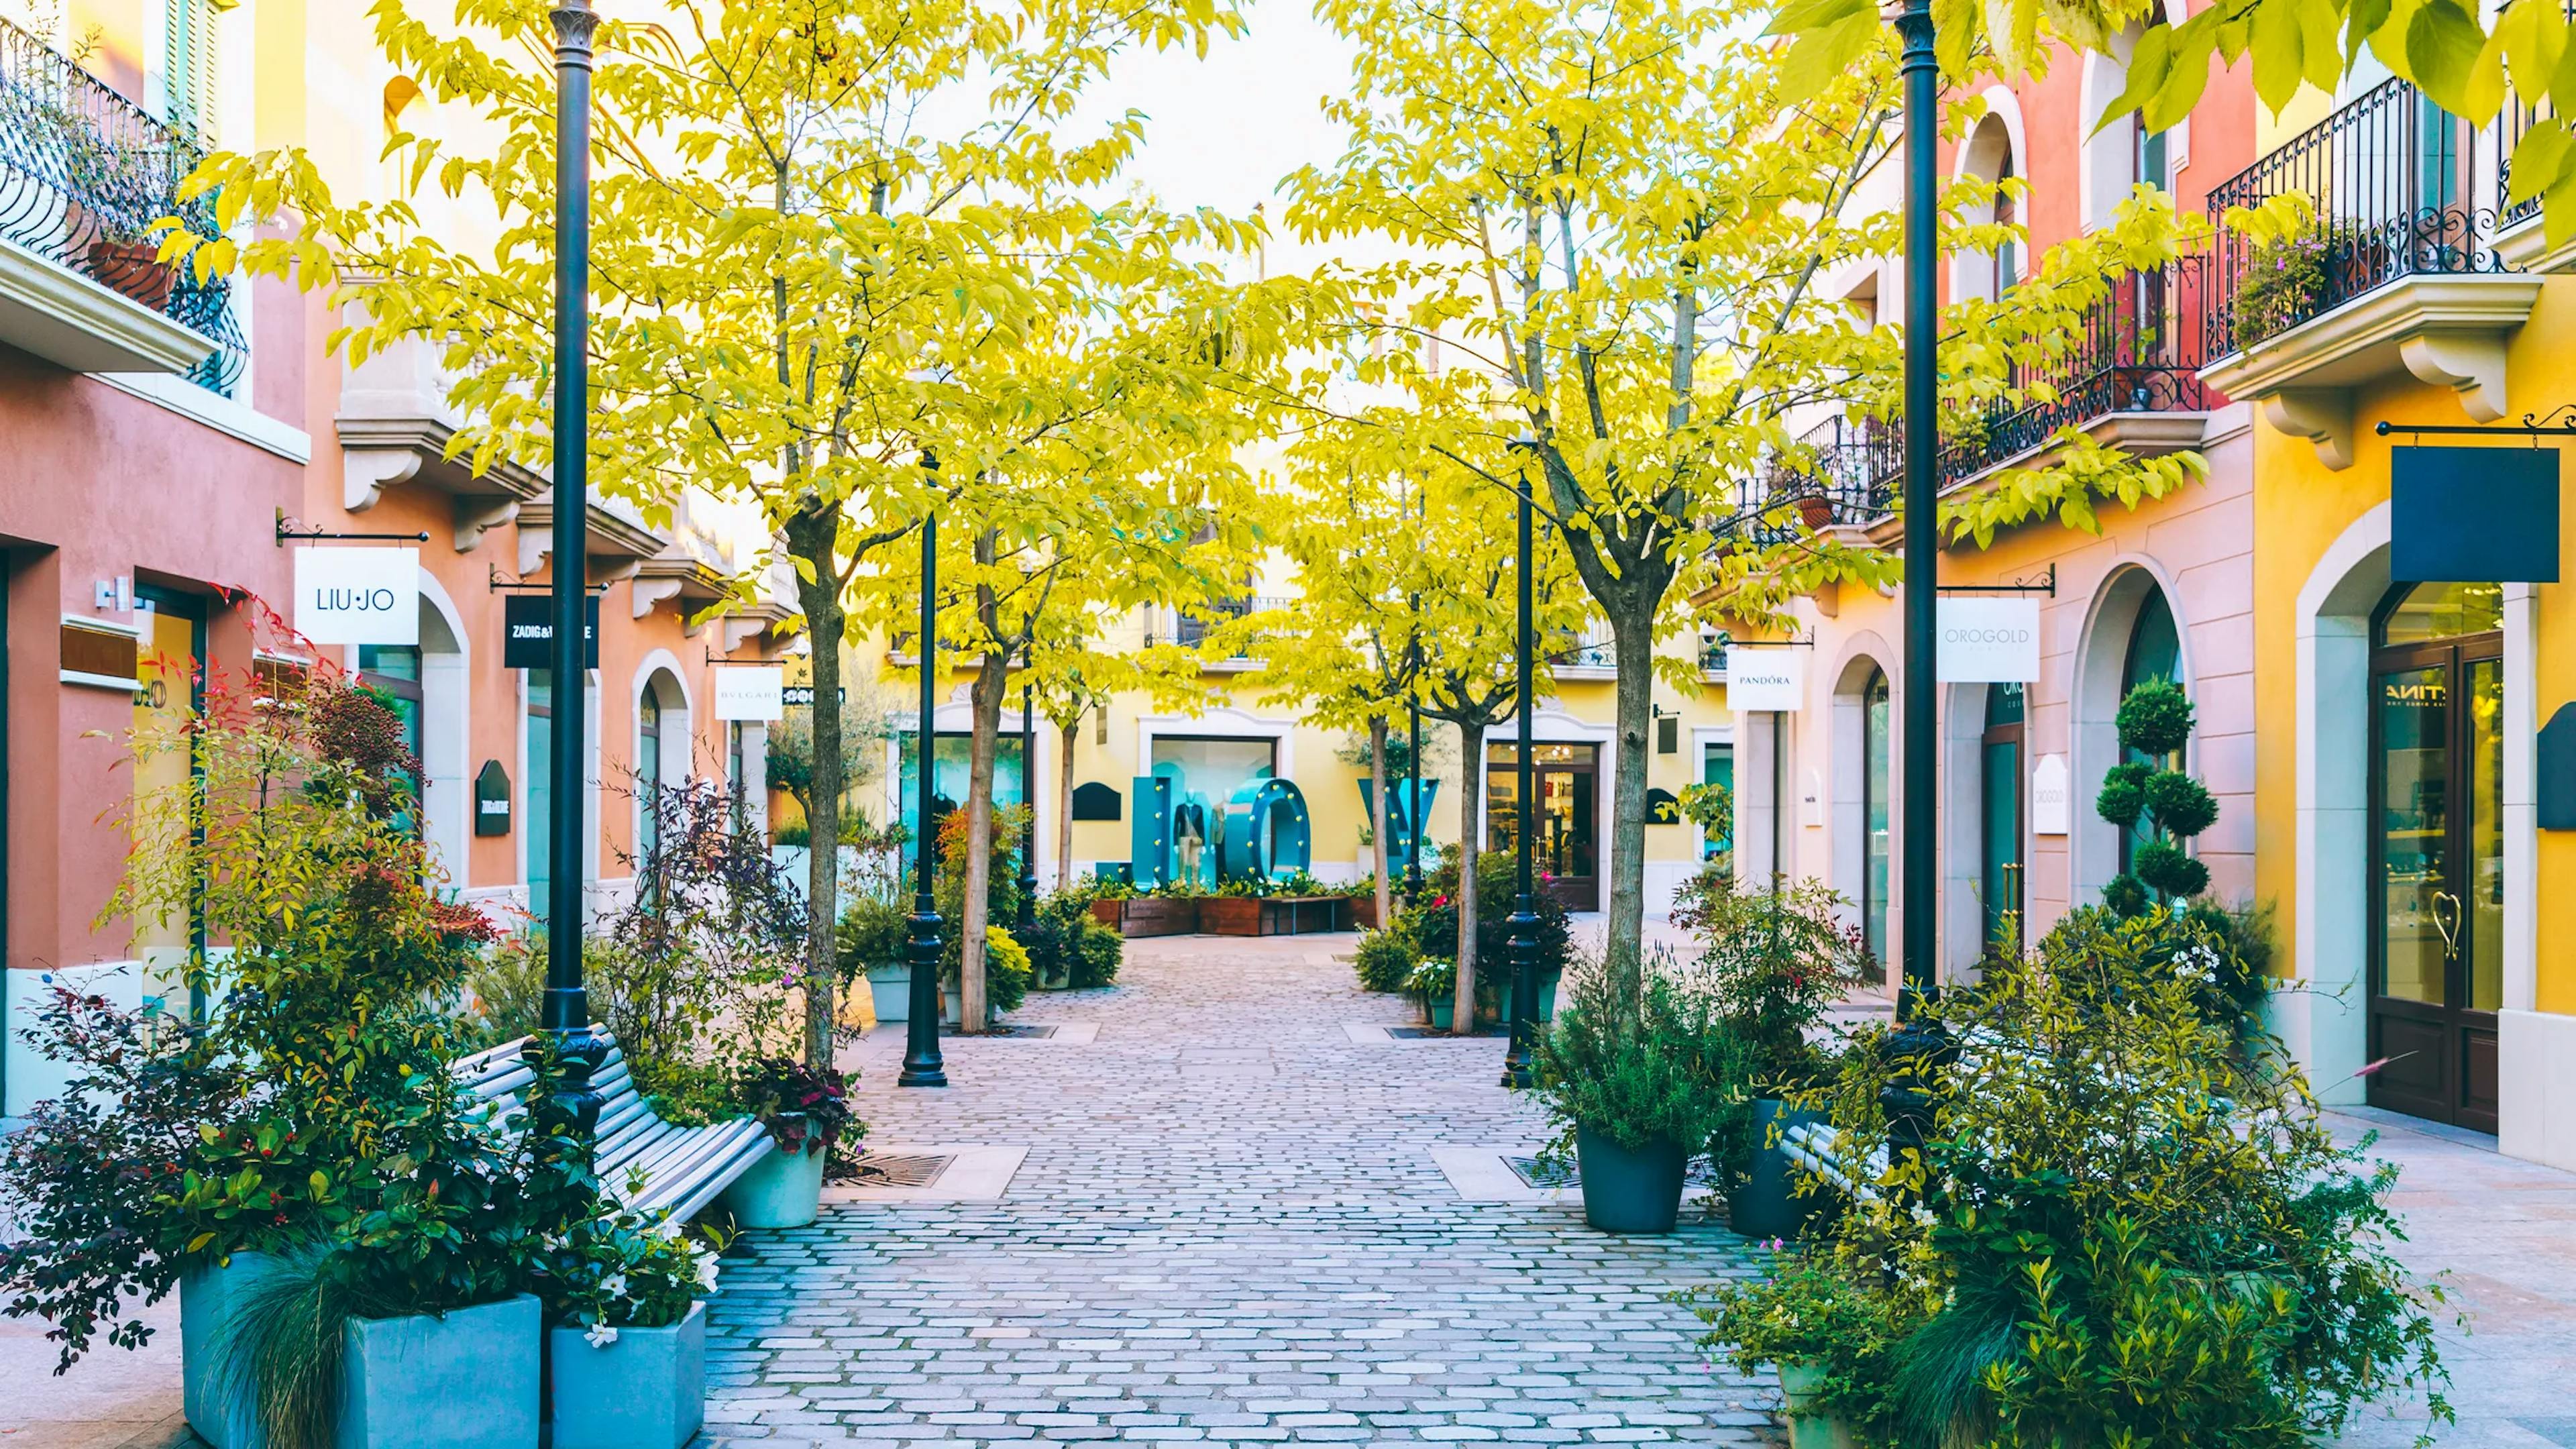 Colorful buildings and trees lining a narrow street at La Roca Village outlet.